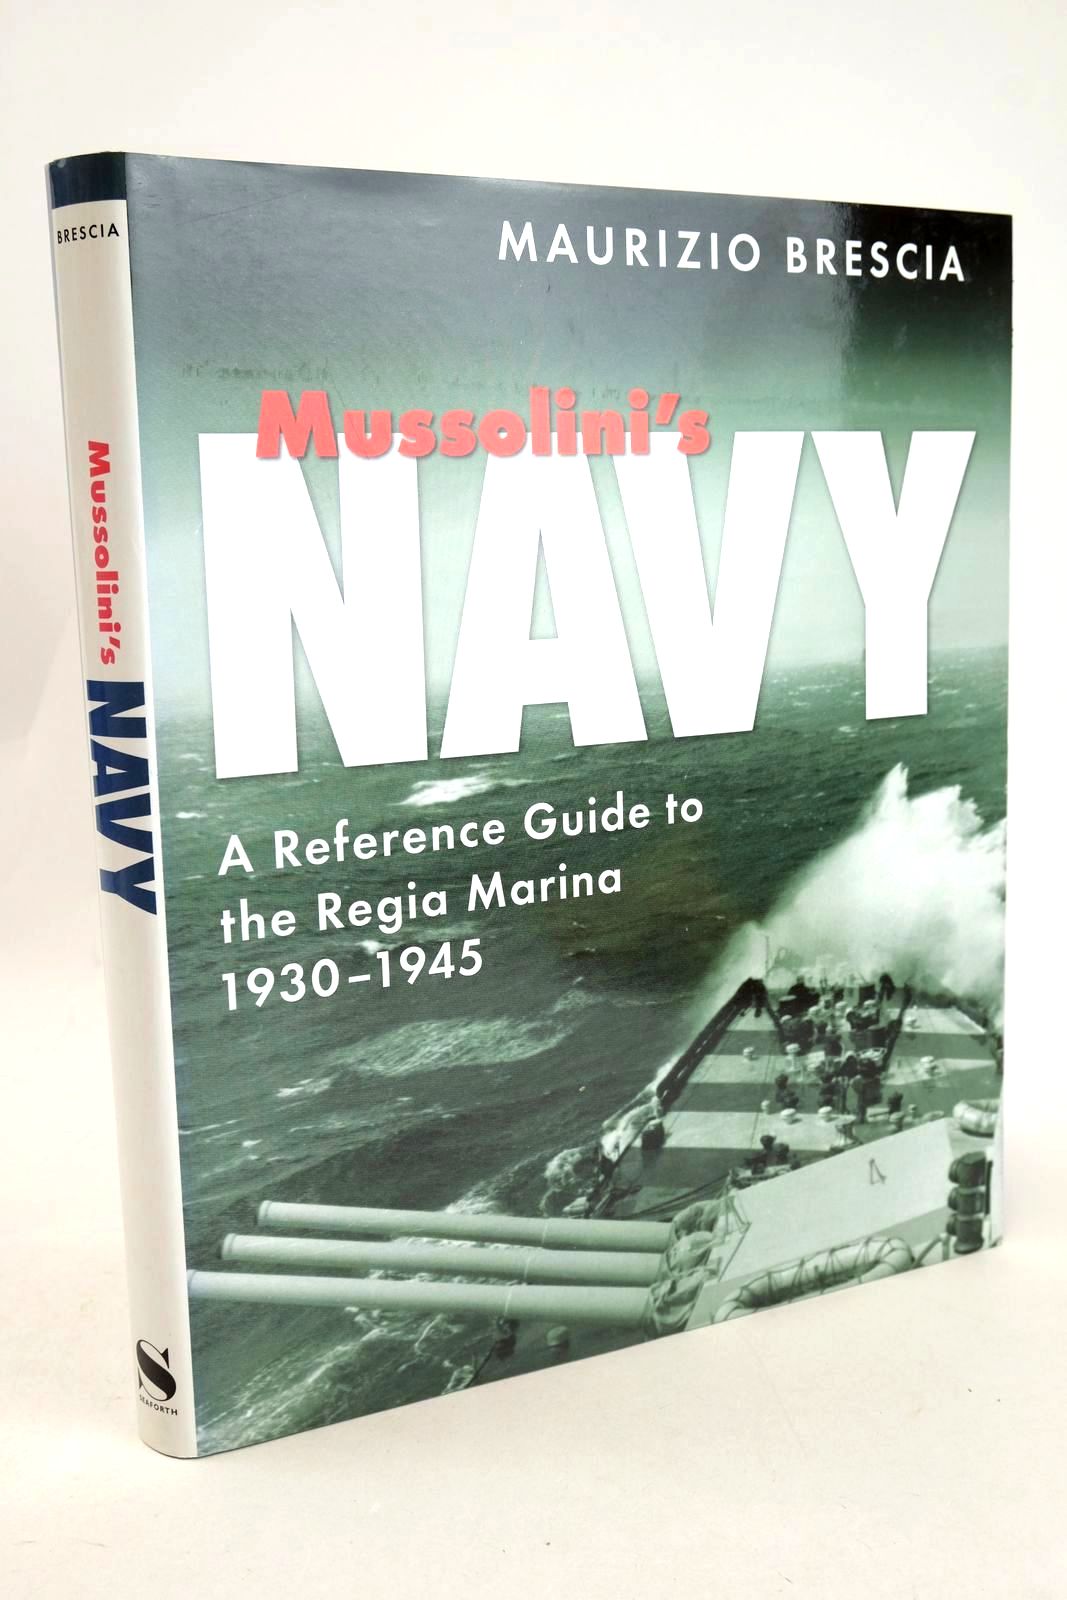 Photo of MUSSOLINI'S NAVY: A REFERENCE GUIDE TO THE REGIA MARINA 1930-1945 written by Brescia, Maurizio illustrated by Zaio, Paola published by Seaforth Publishing (STOCK CODE: 1327993)  for sale by Stella & Rose's Books